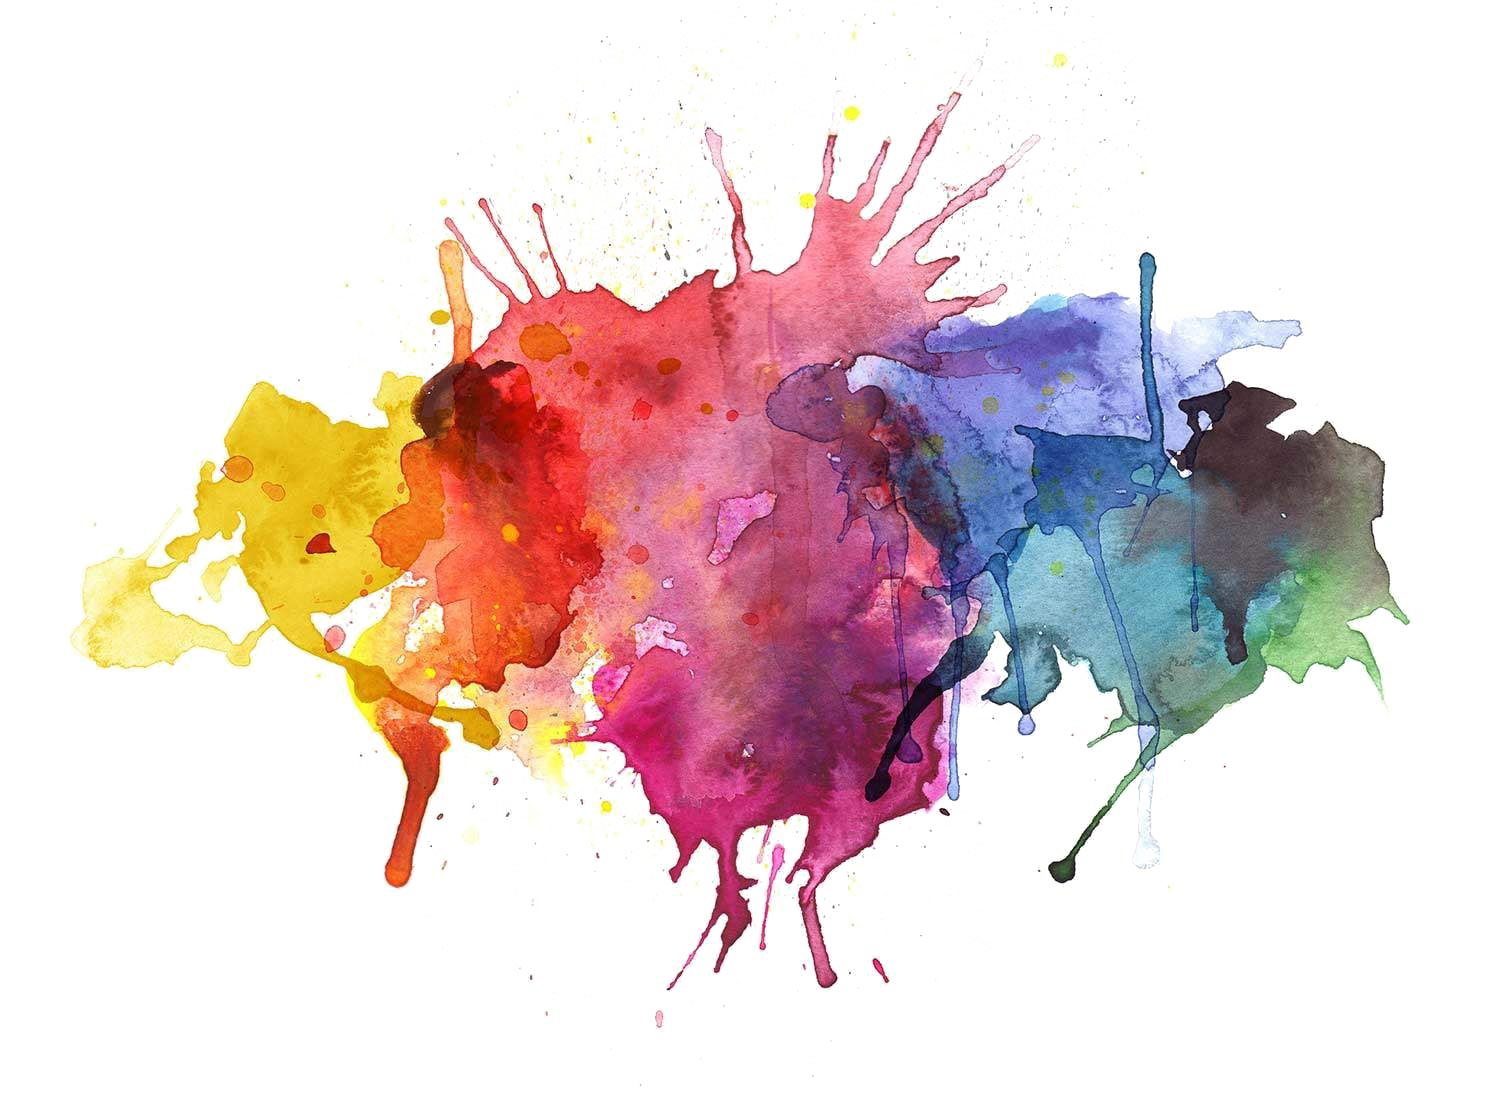 Download Abstract Watercolor Images Free Transparent Image Hd Hq Png